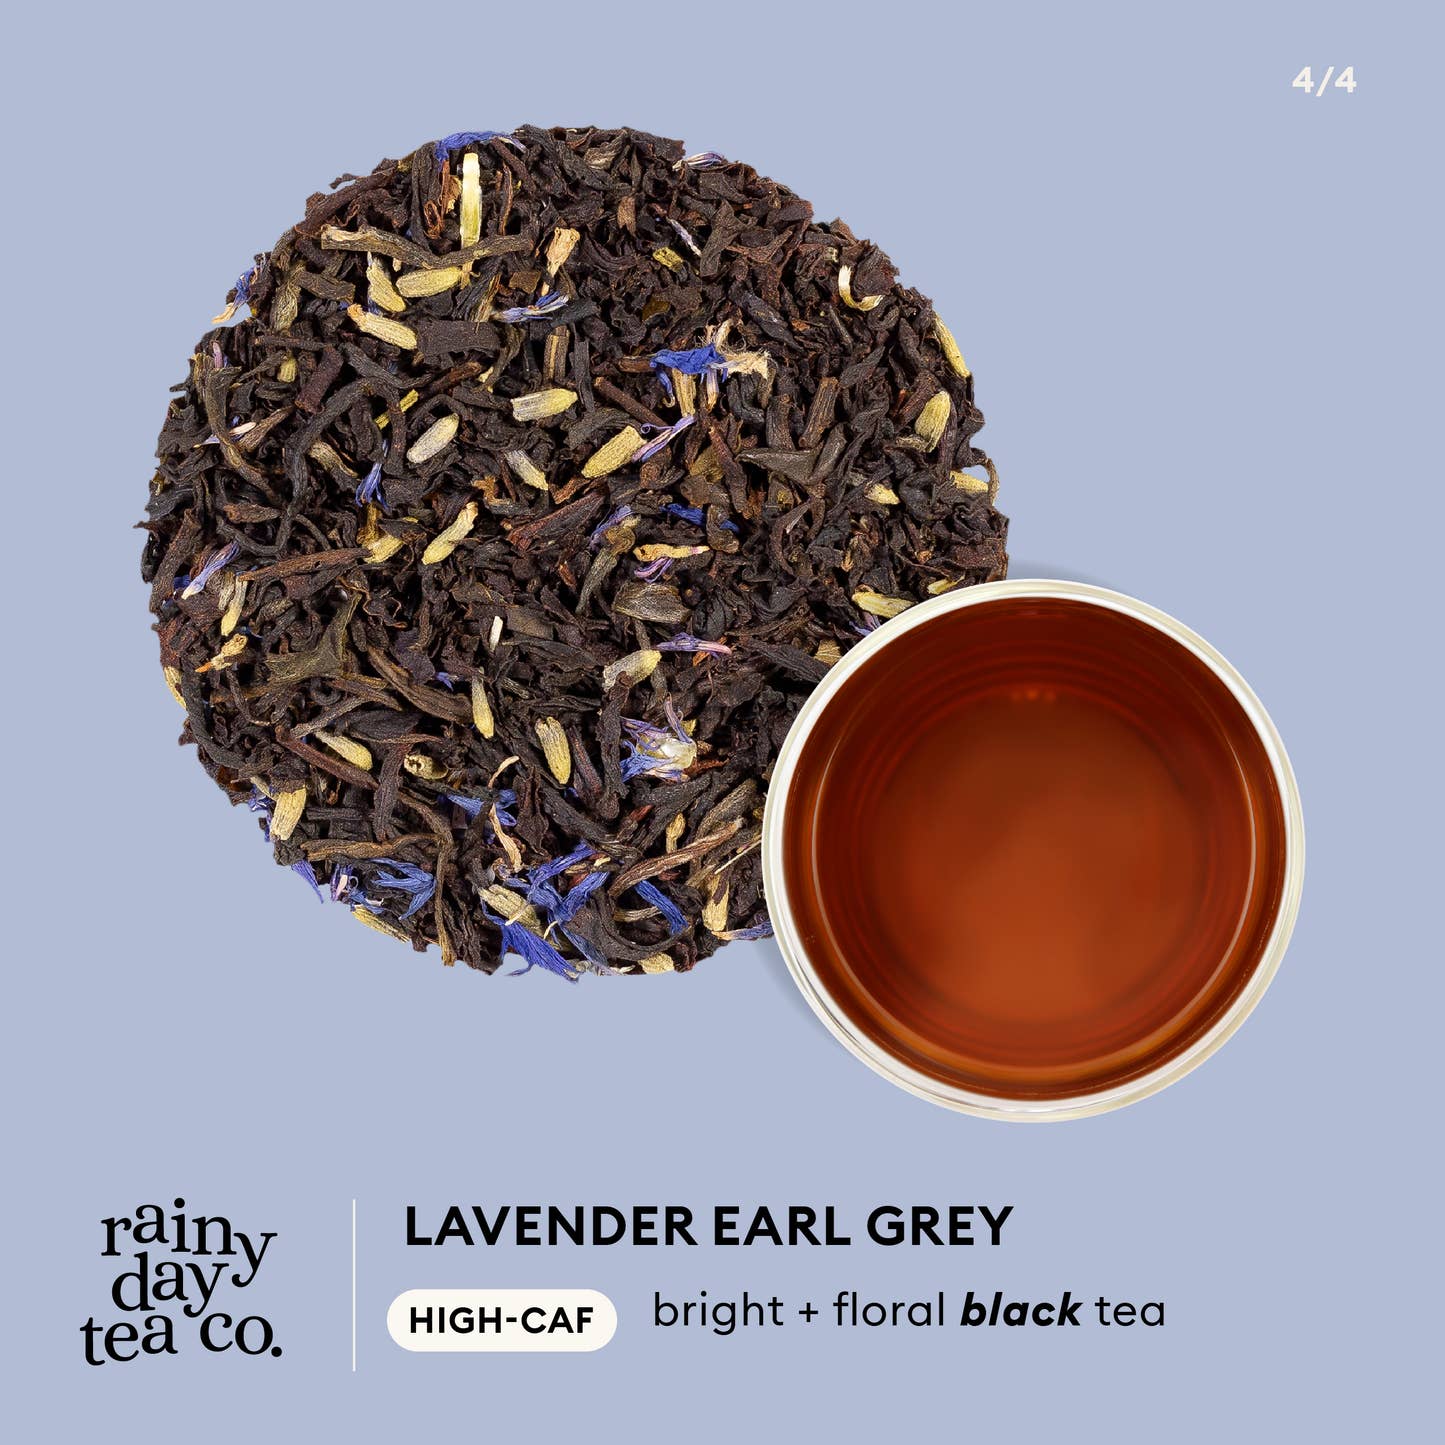 Lavender Earl Grey by Rainy Day Tea Co. Infographic - HIGH-CAF bright + floral black tea